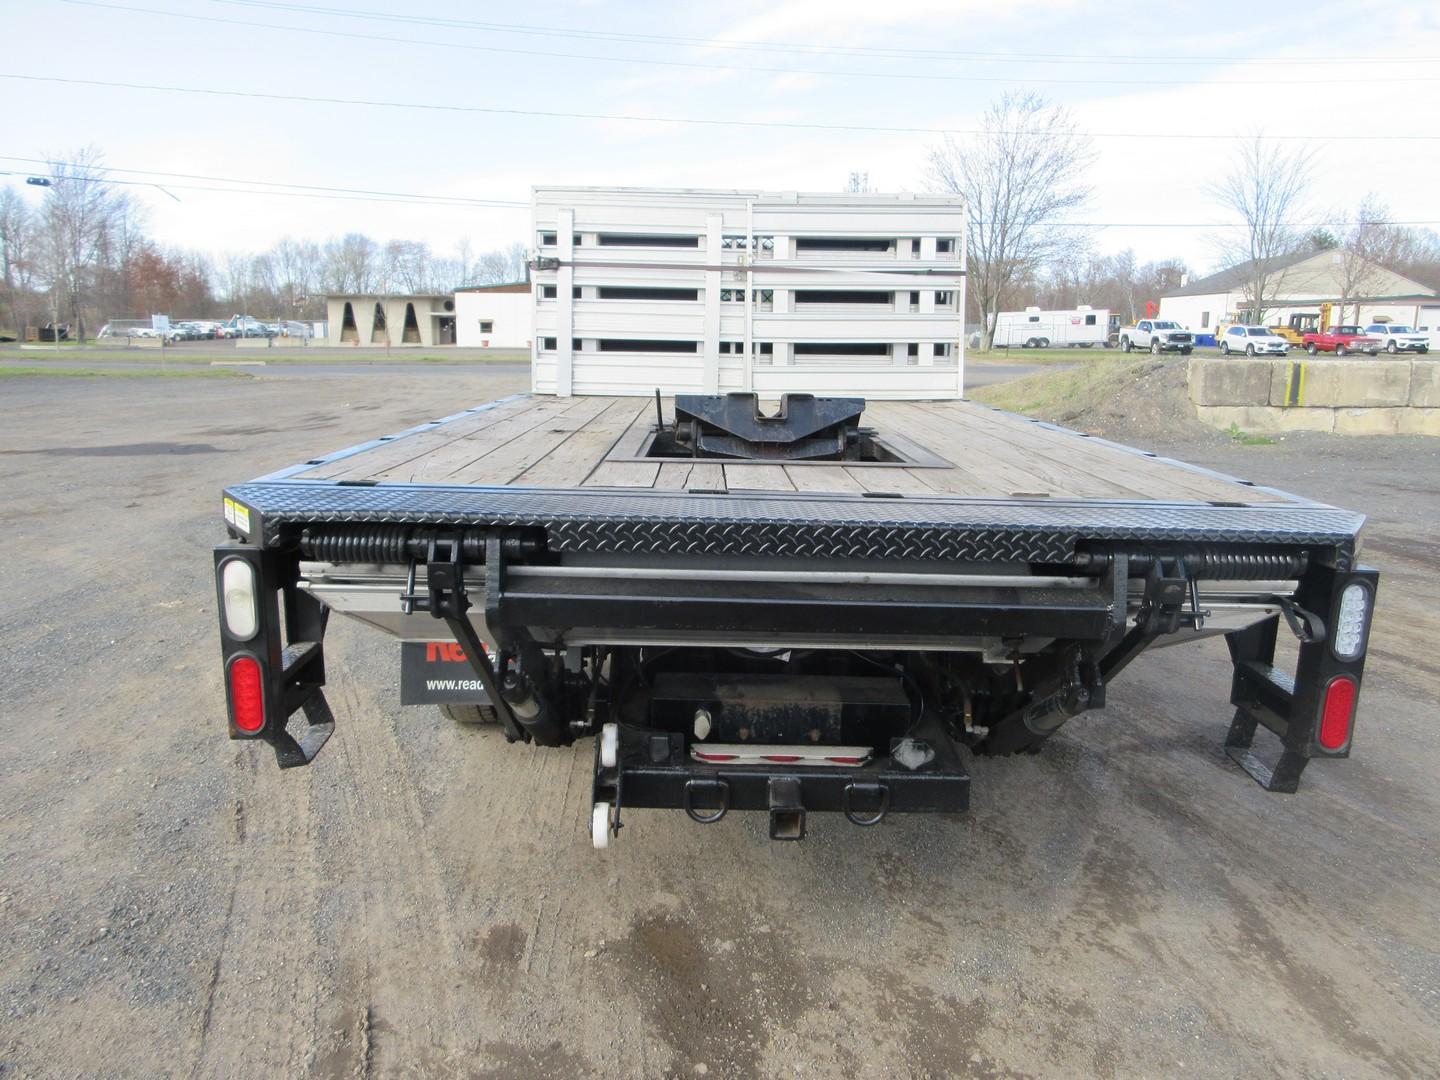 2013 Ford F-550 XL S/A Flatbed Truck